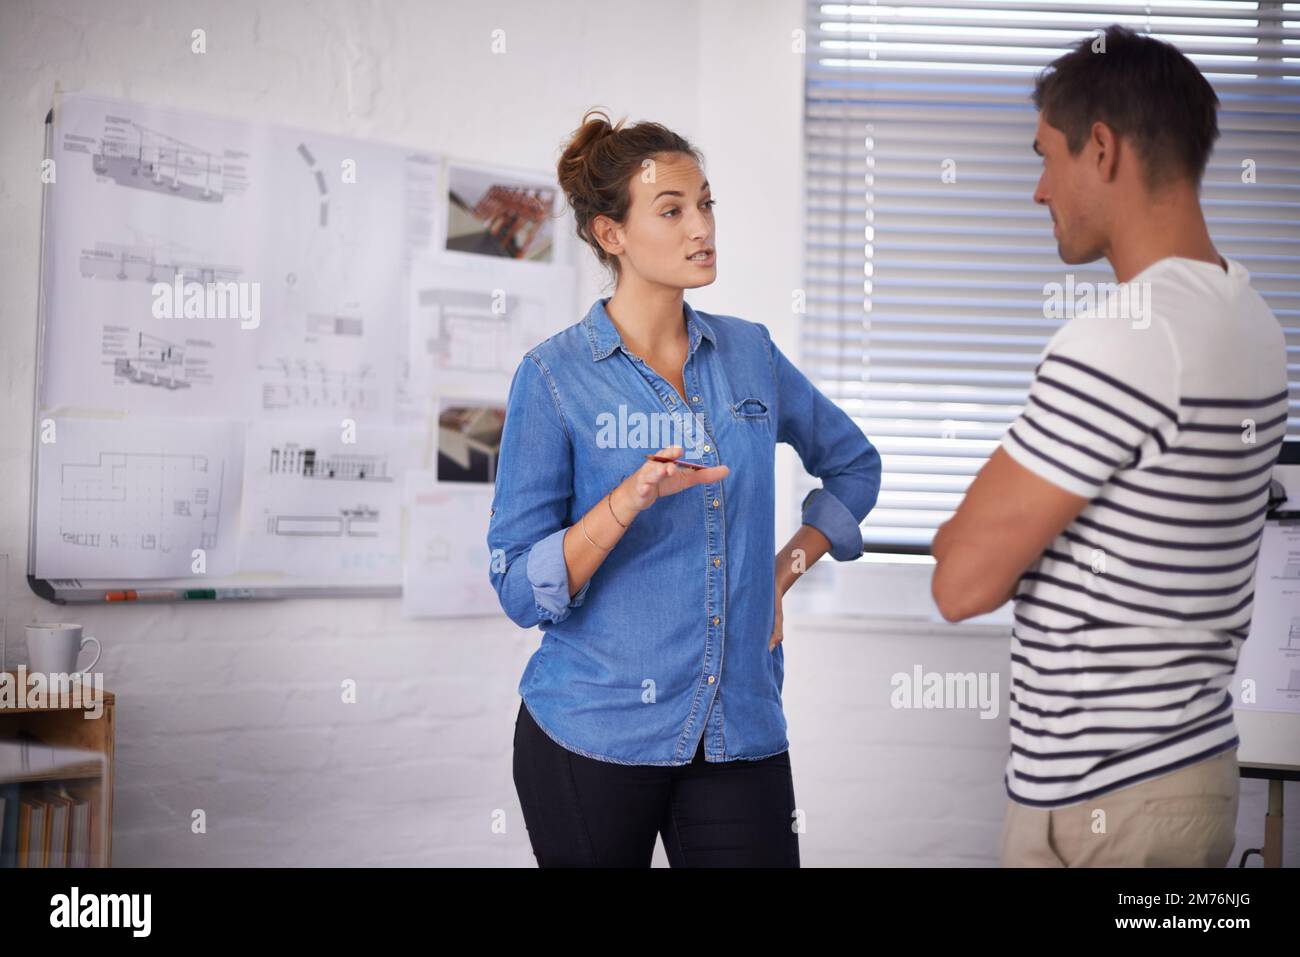 Discussing ideas for the blueprint. two young designers working together in an office. Stock Photo